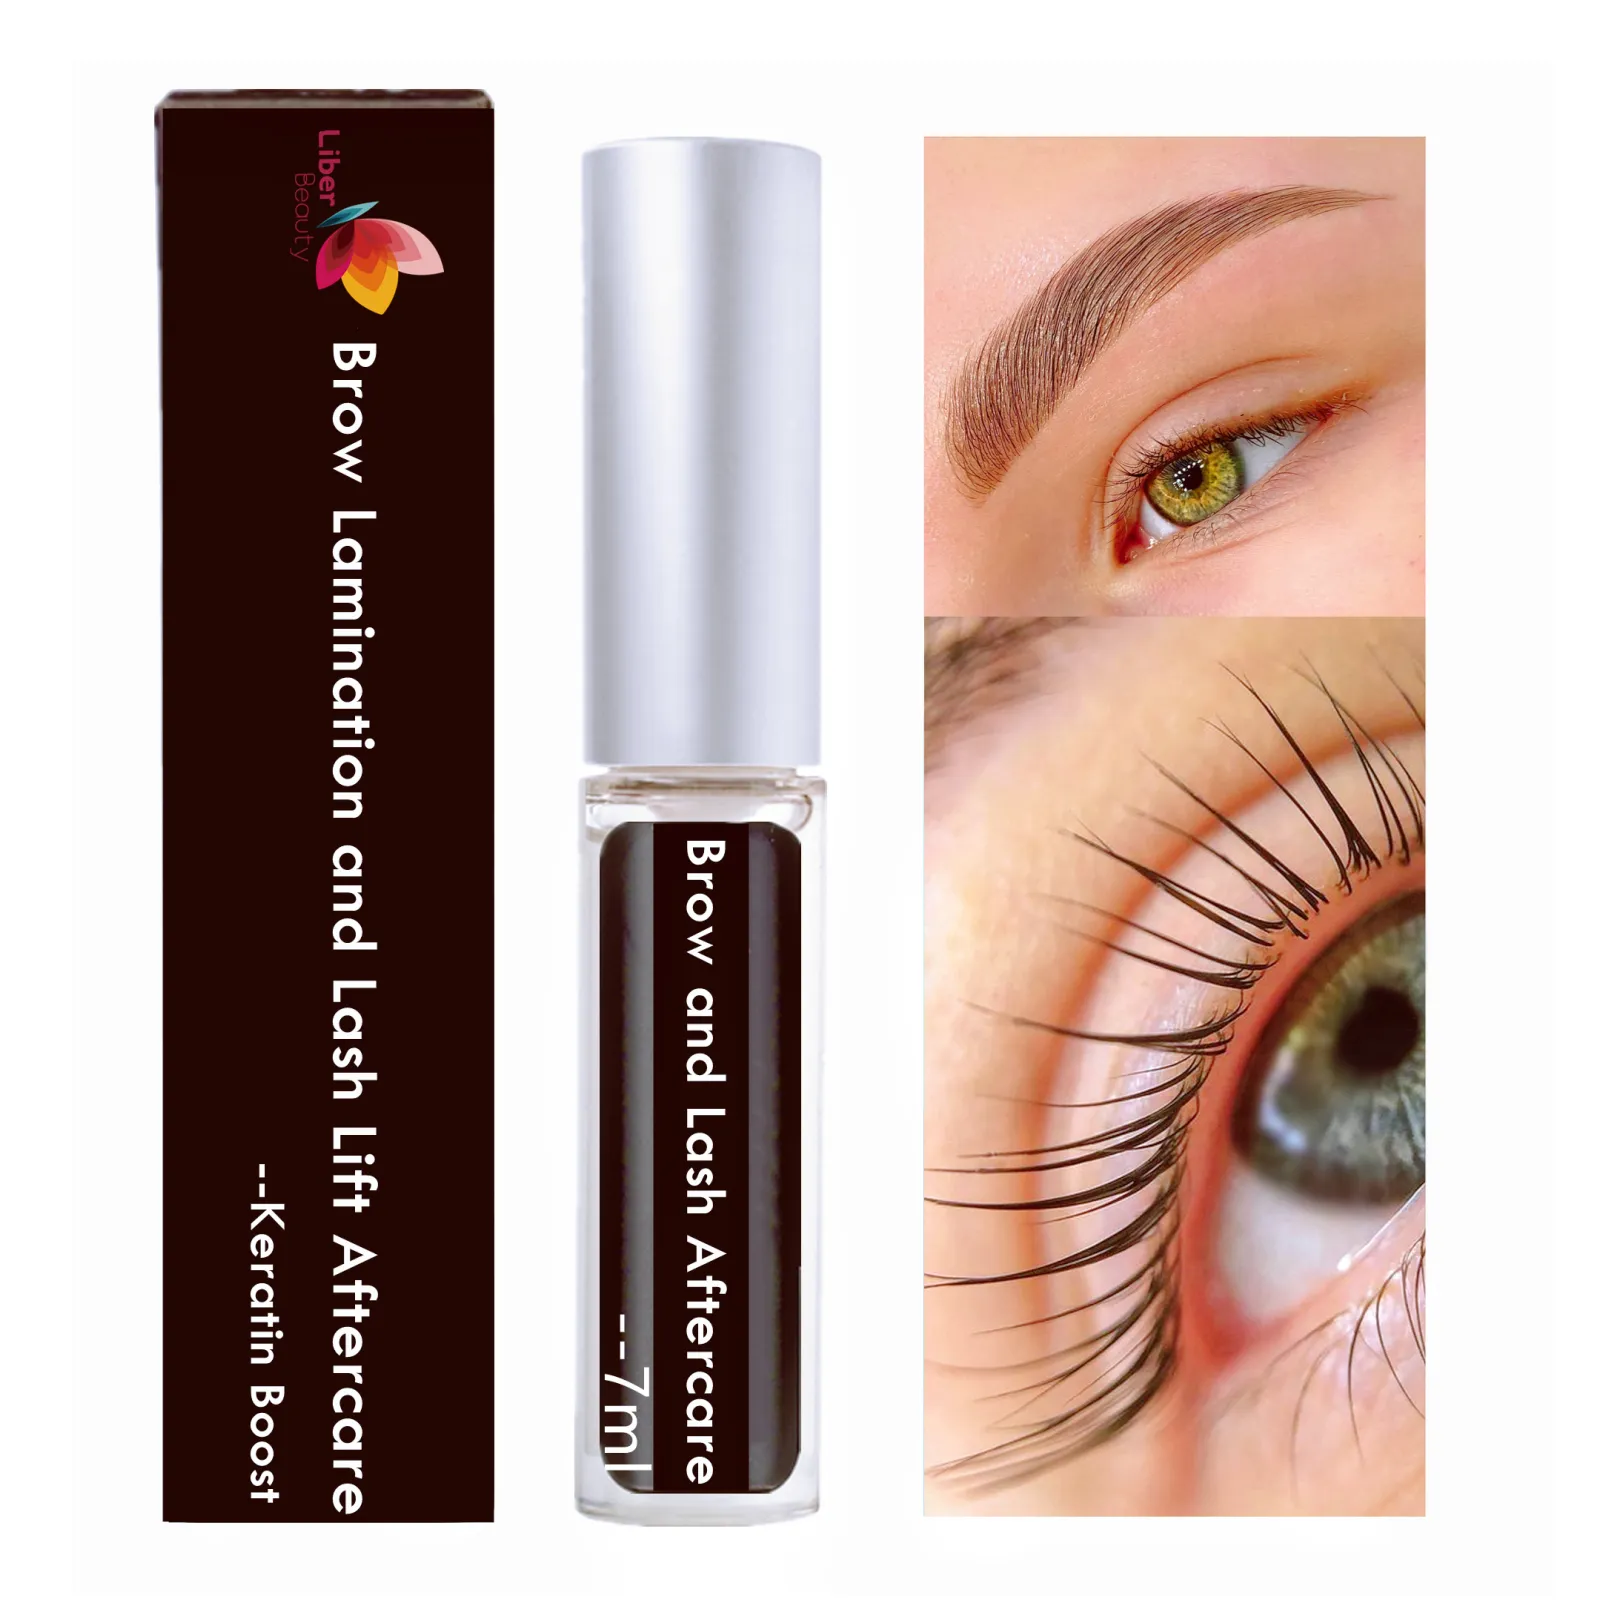 Brow Lamination Aftercare Eyebrow Lifting Conditioner Lash Lift Nutrition for Saving Burning Lash or Brow Daily Brow Treatment